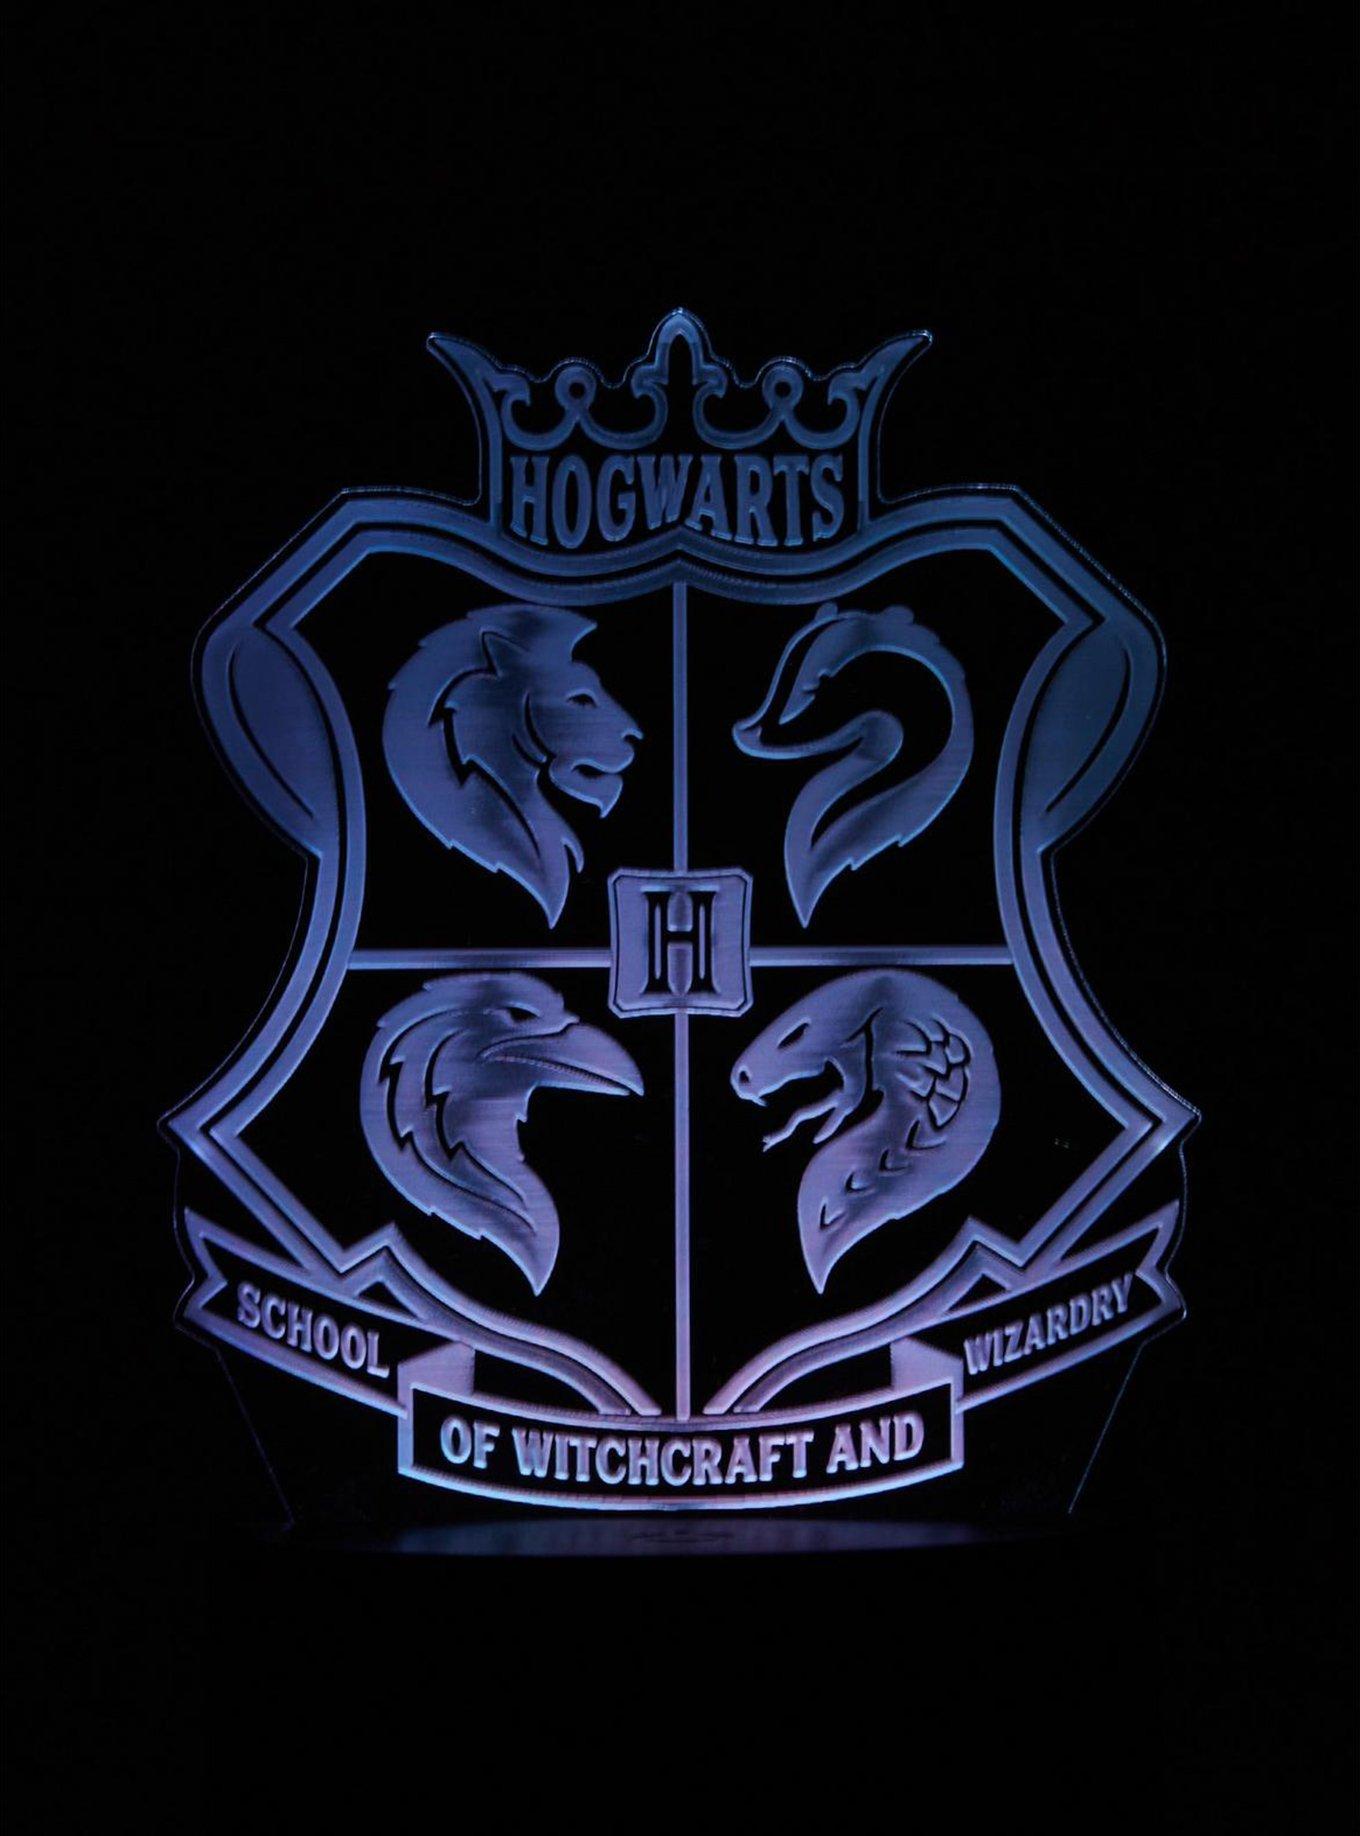 hogwarts school of witchcraft and wizardry logo